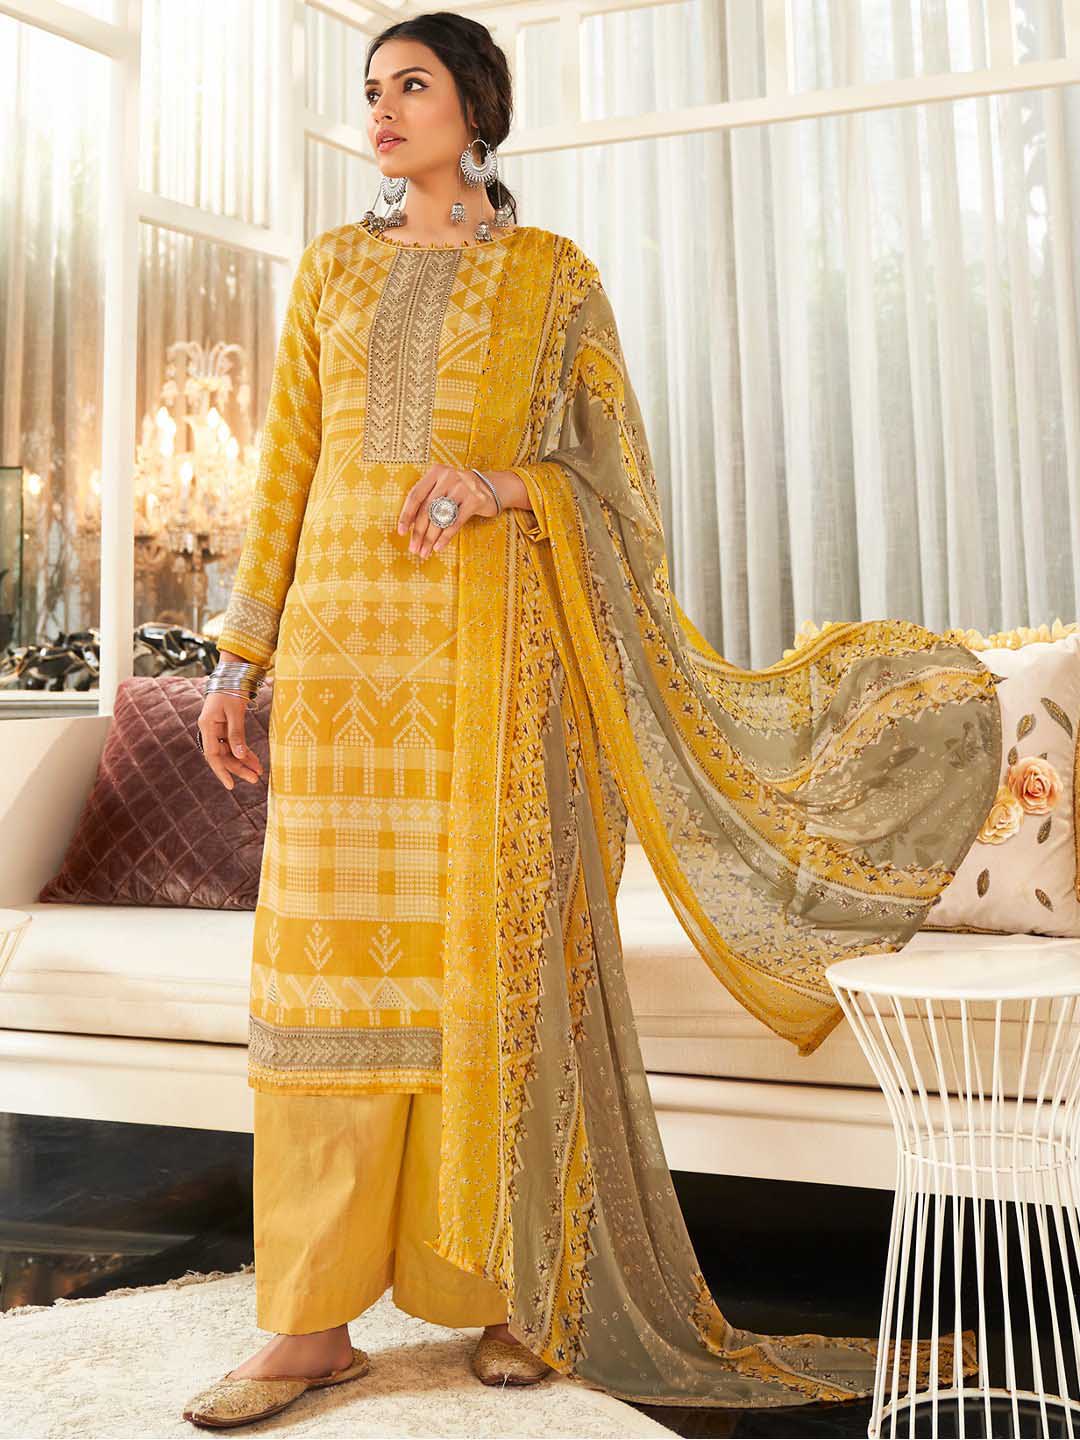 Unstitched Mustard Cotton Printed Suit Materials for Women with Dupatta - Stilento